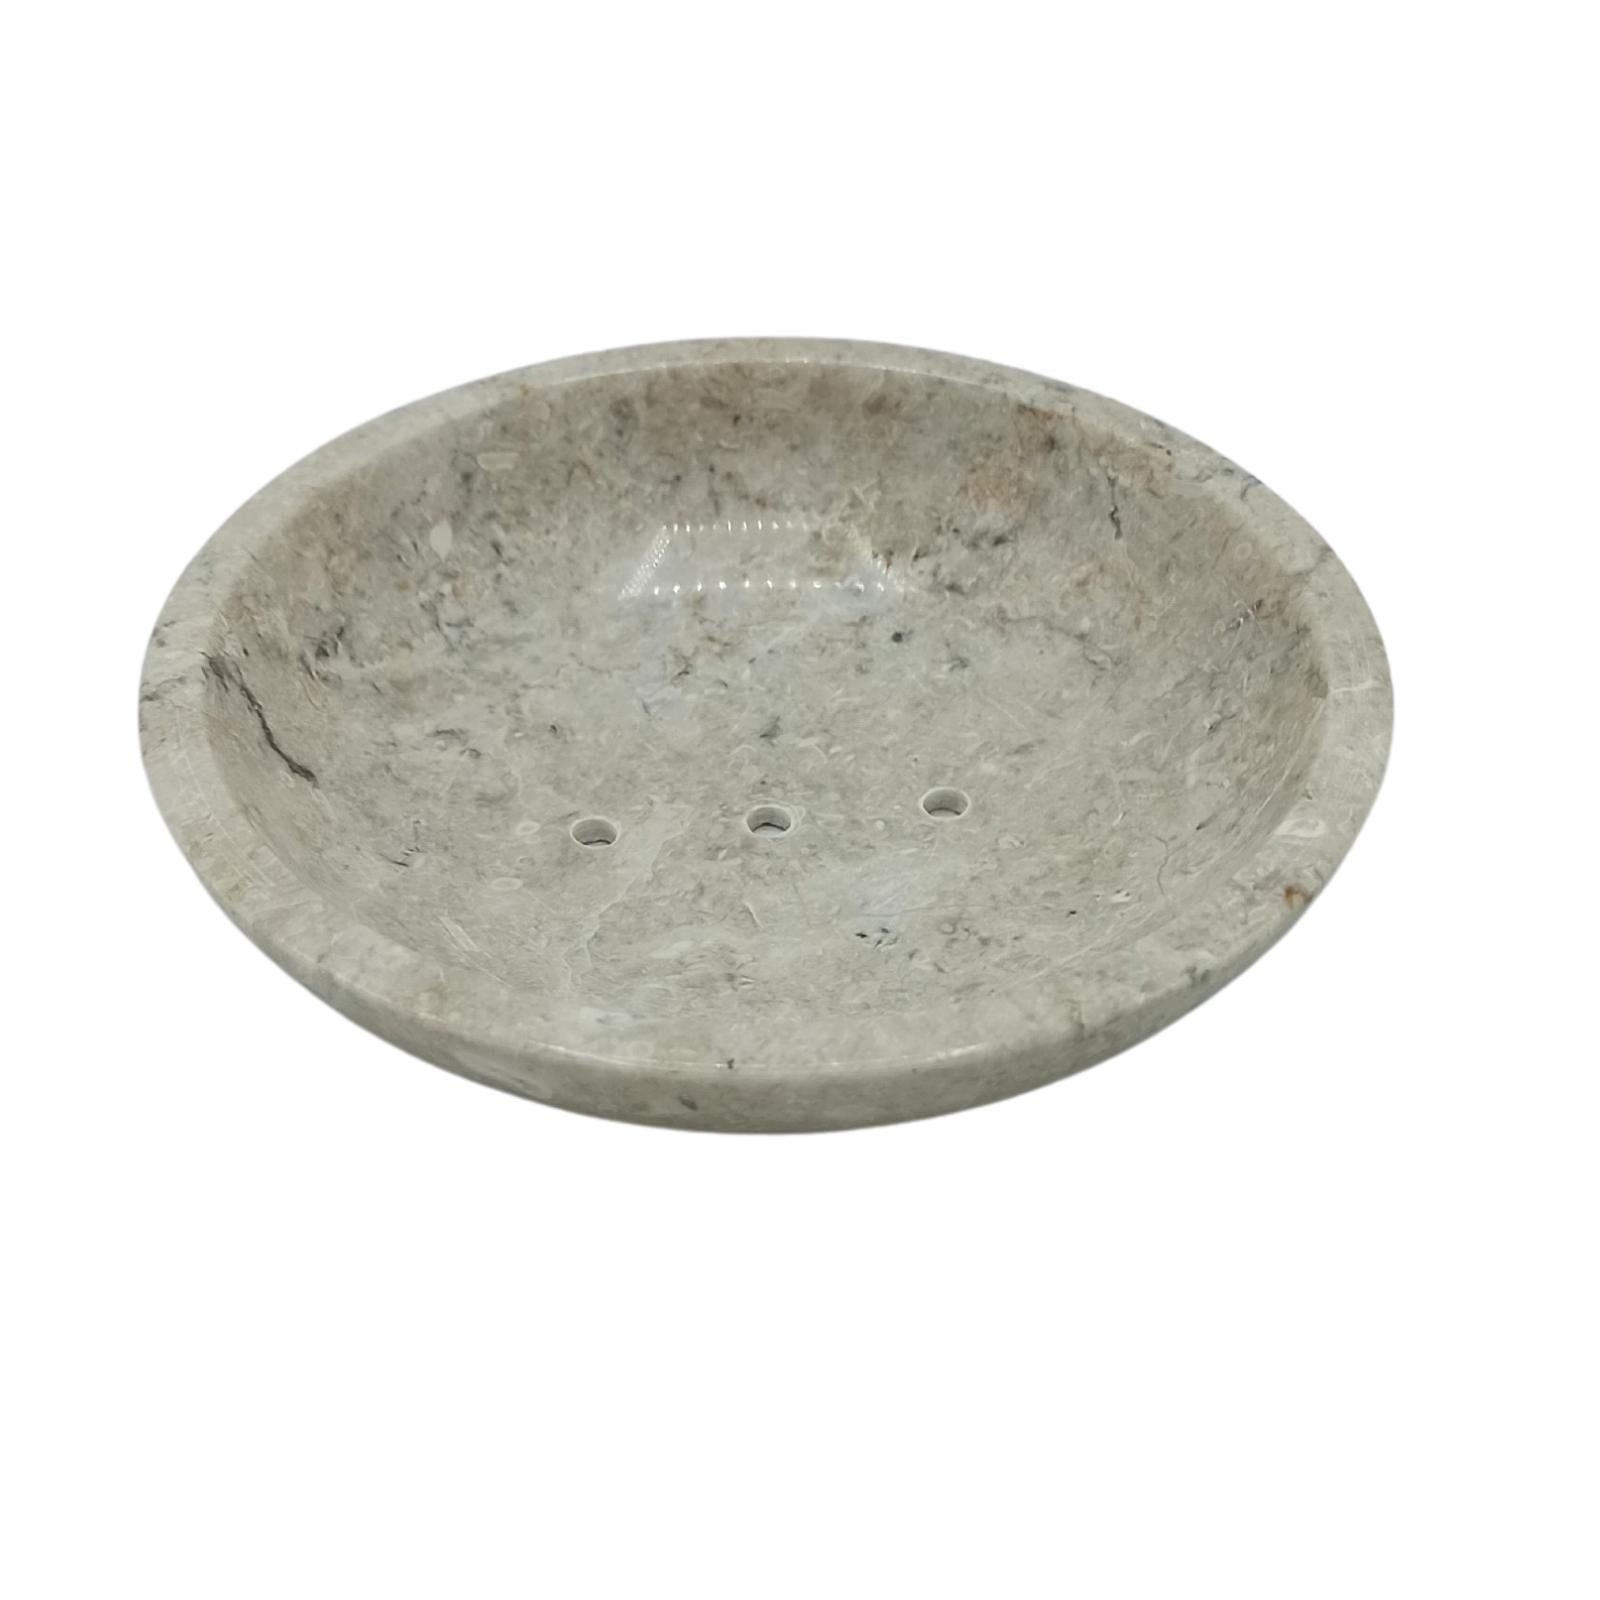 View Round Honey Marble Rounded Soap Dish information